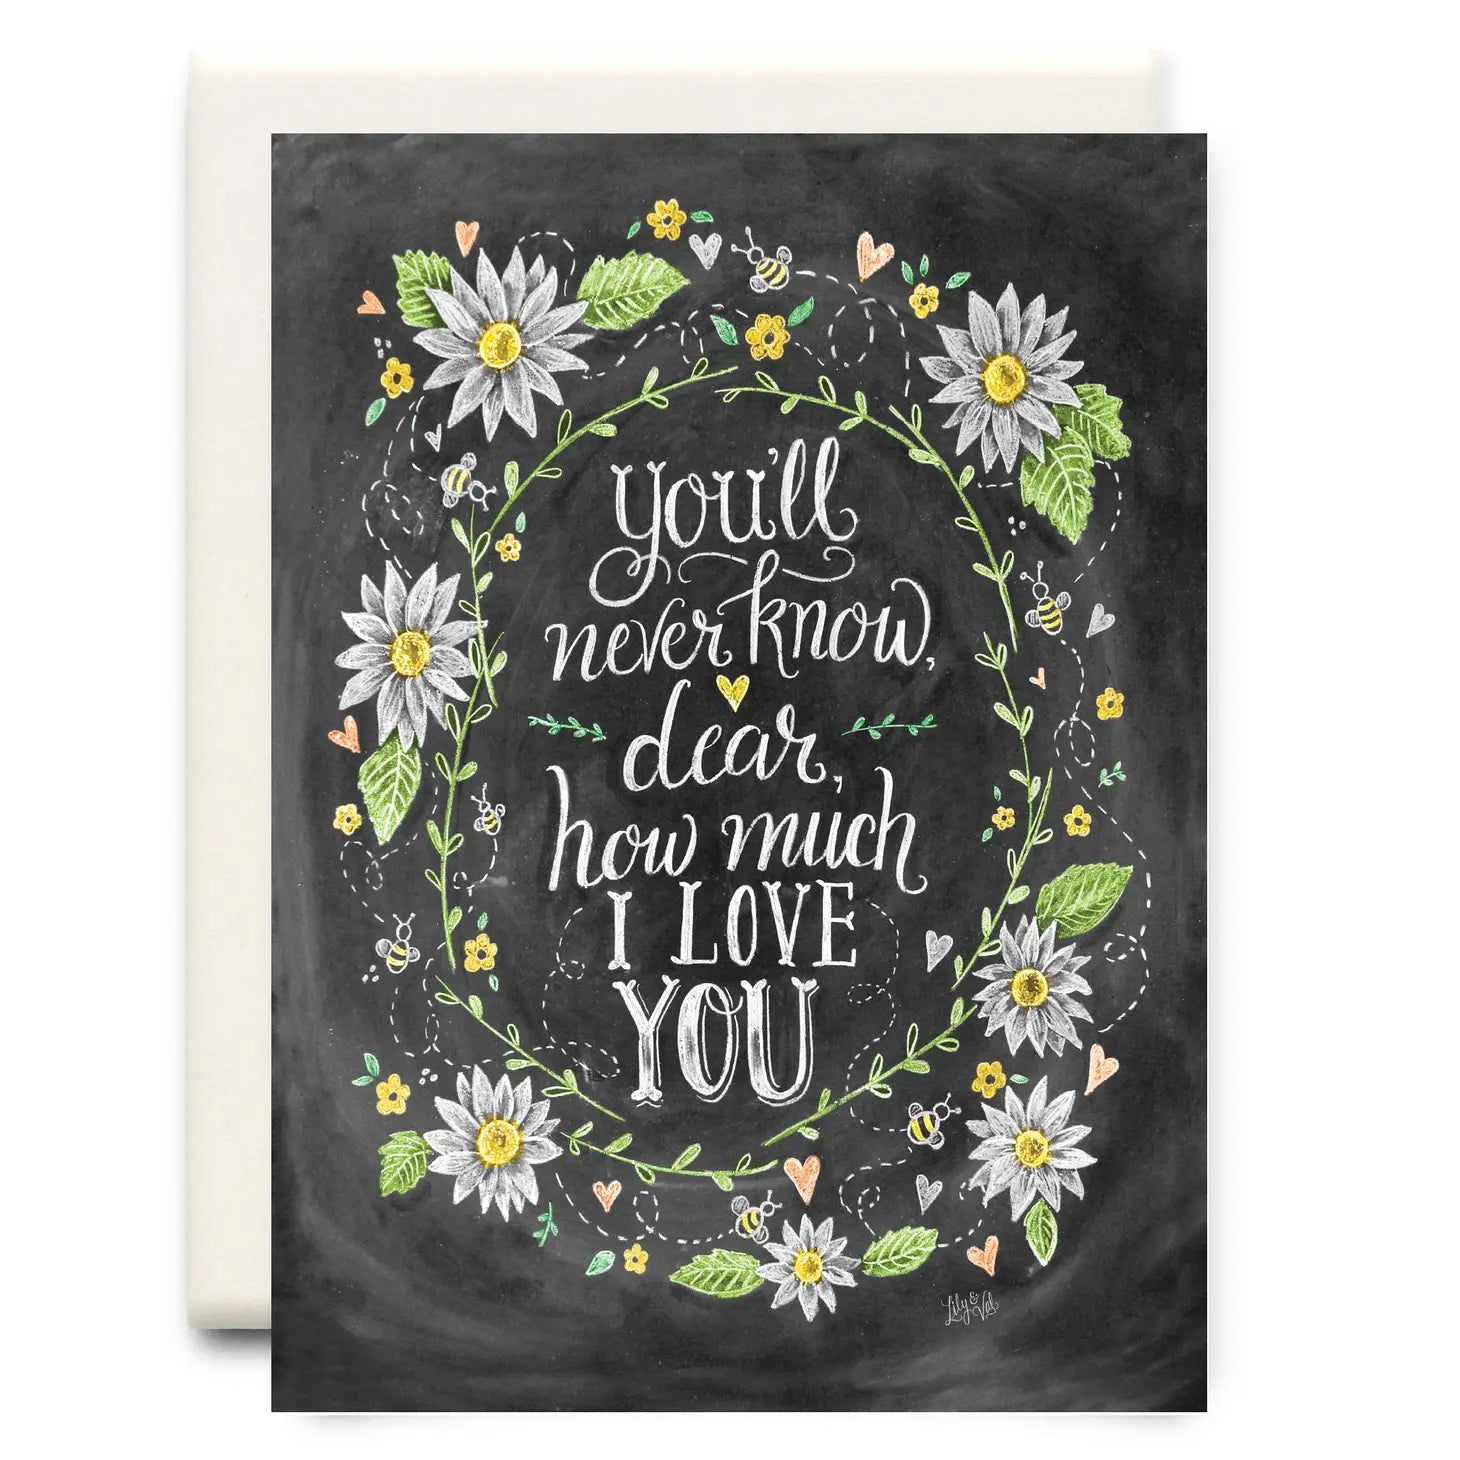 Inkwell Cards “How Much I Love You” Card